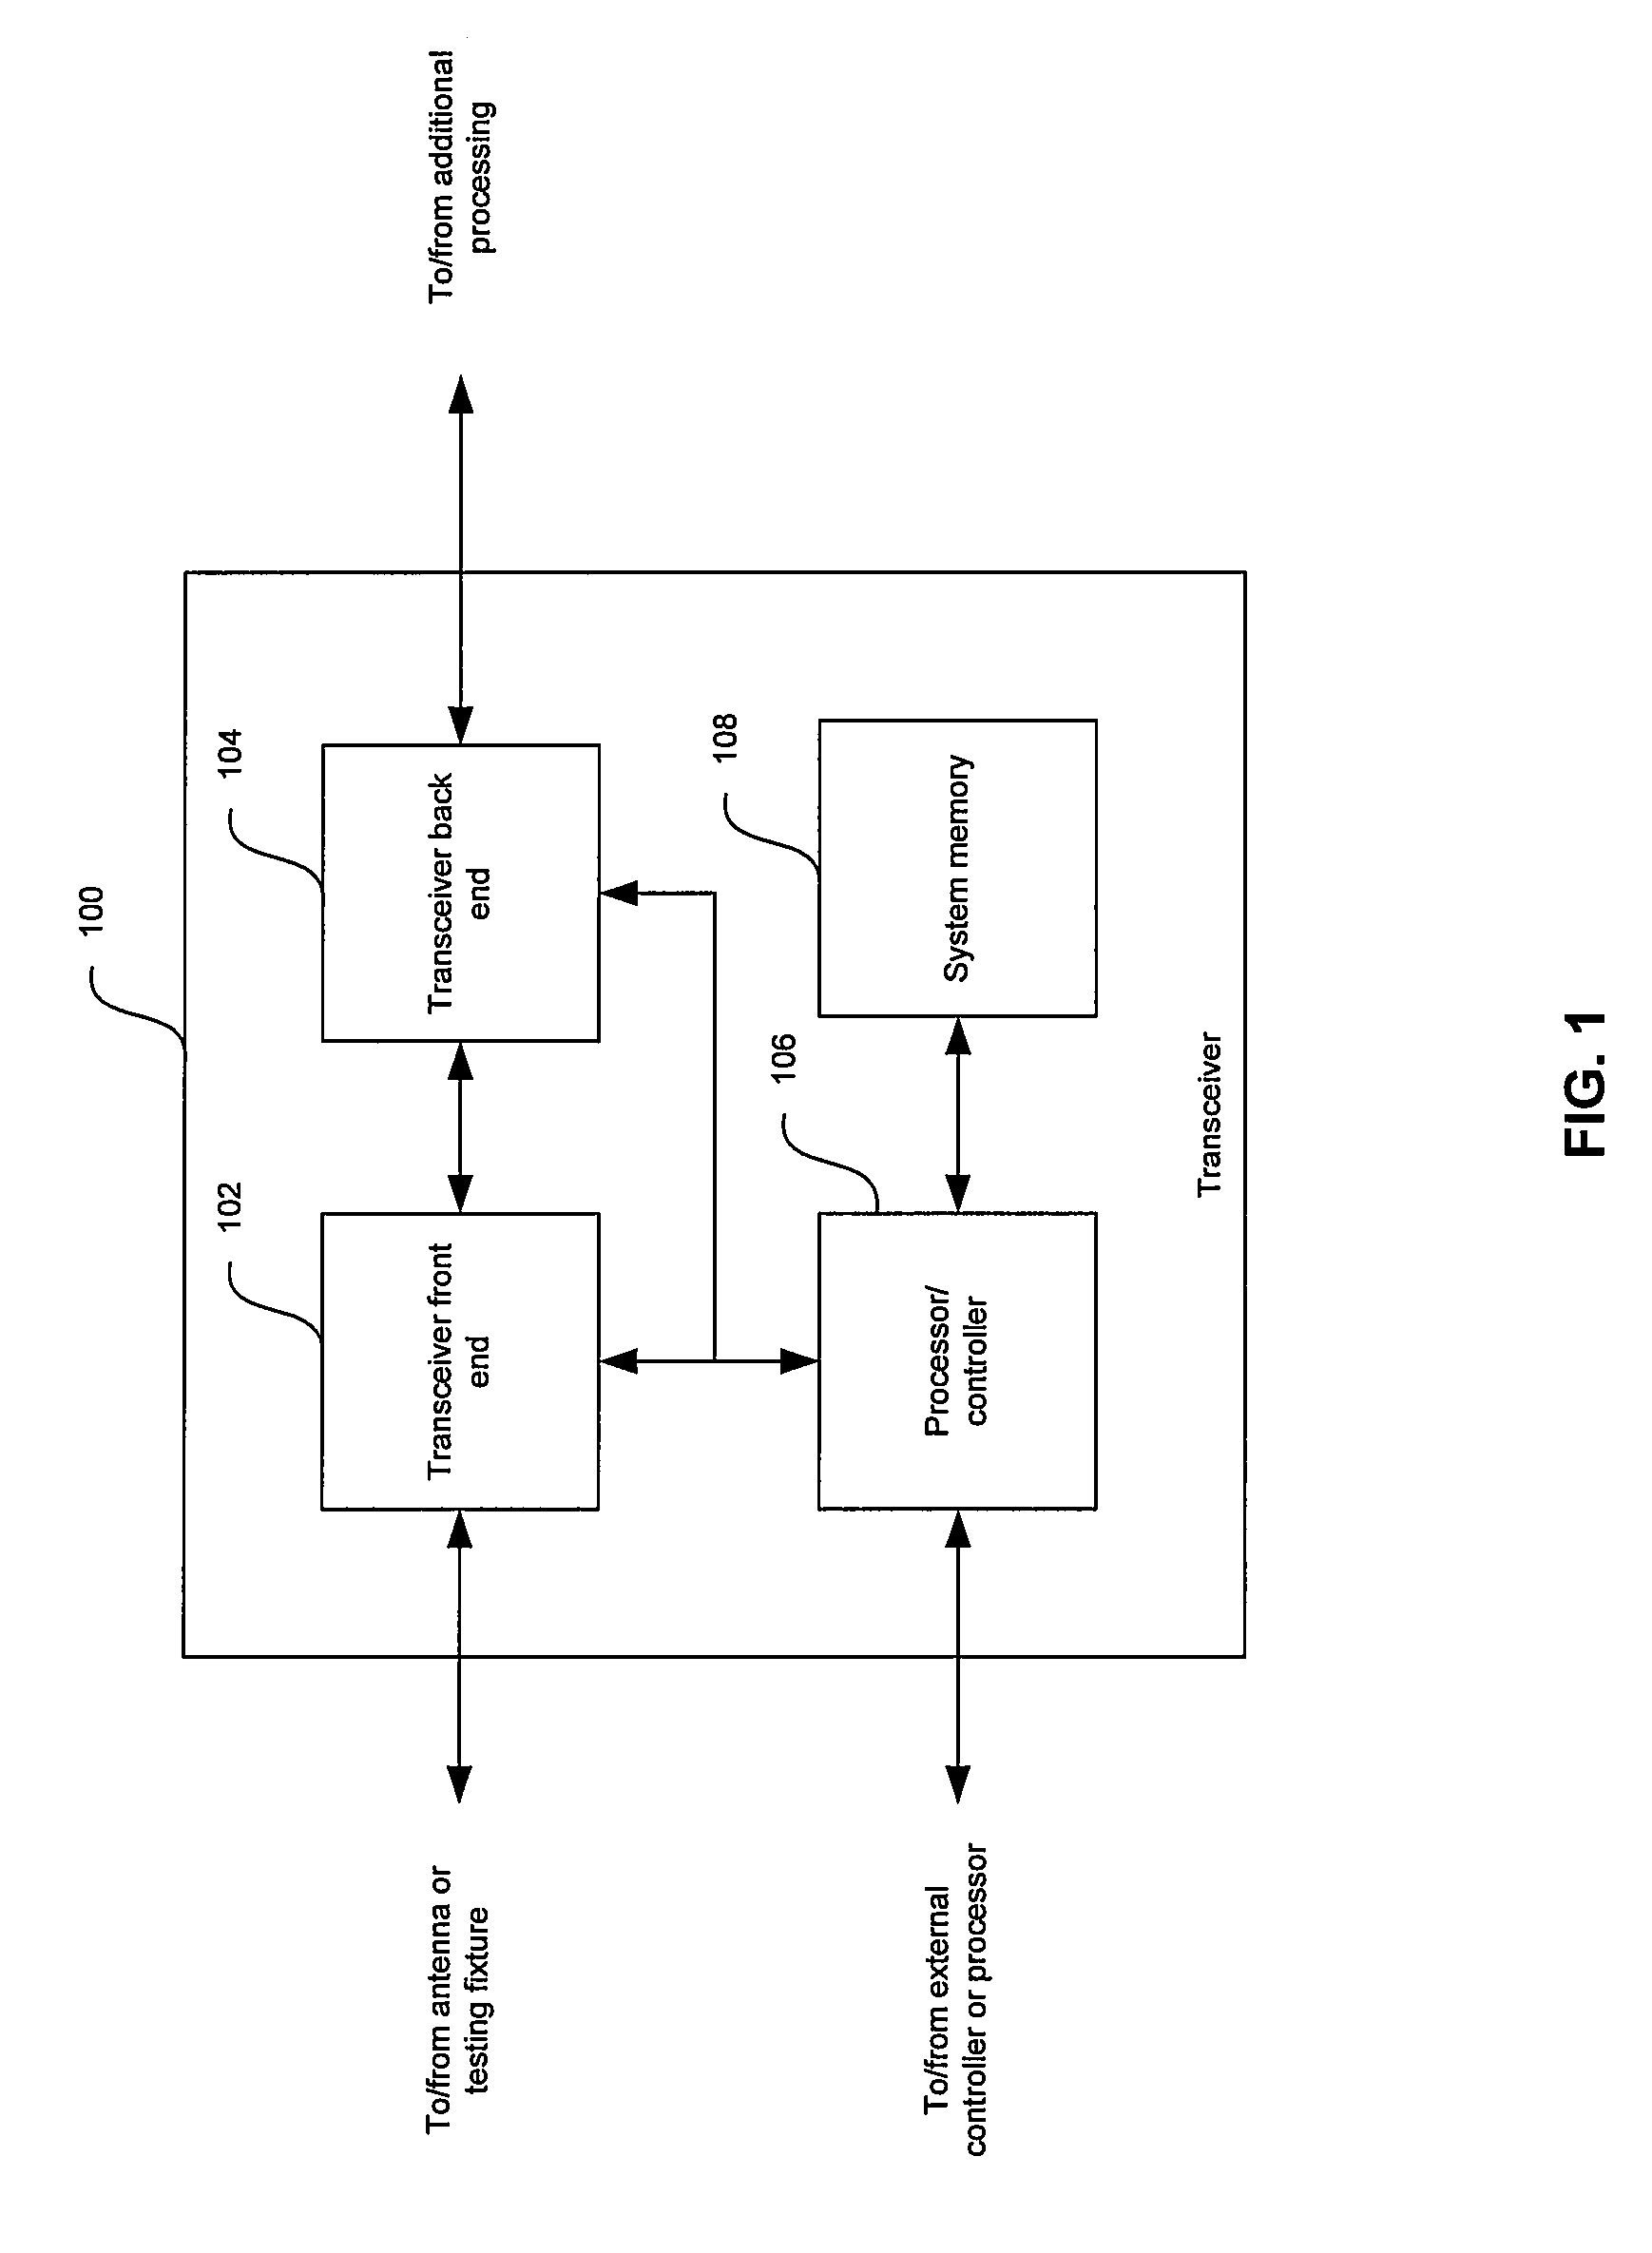 Method and System for RC-CR Quadrature Generation with Wideband Coverage and Process Compensation